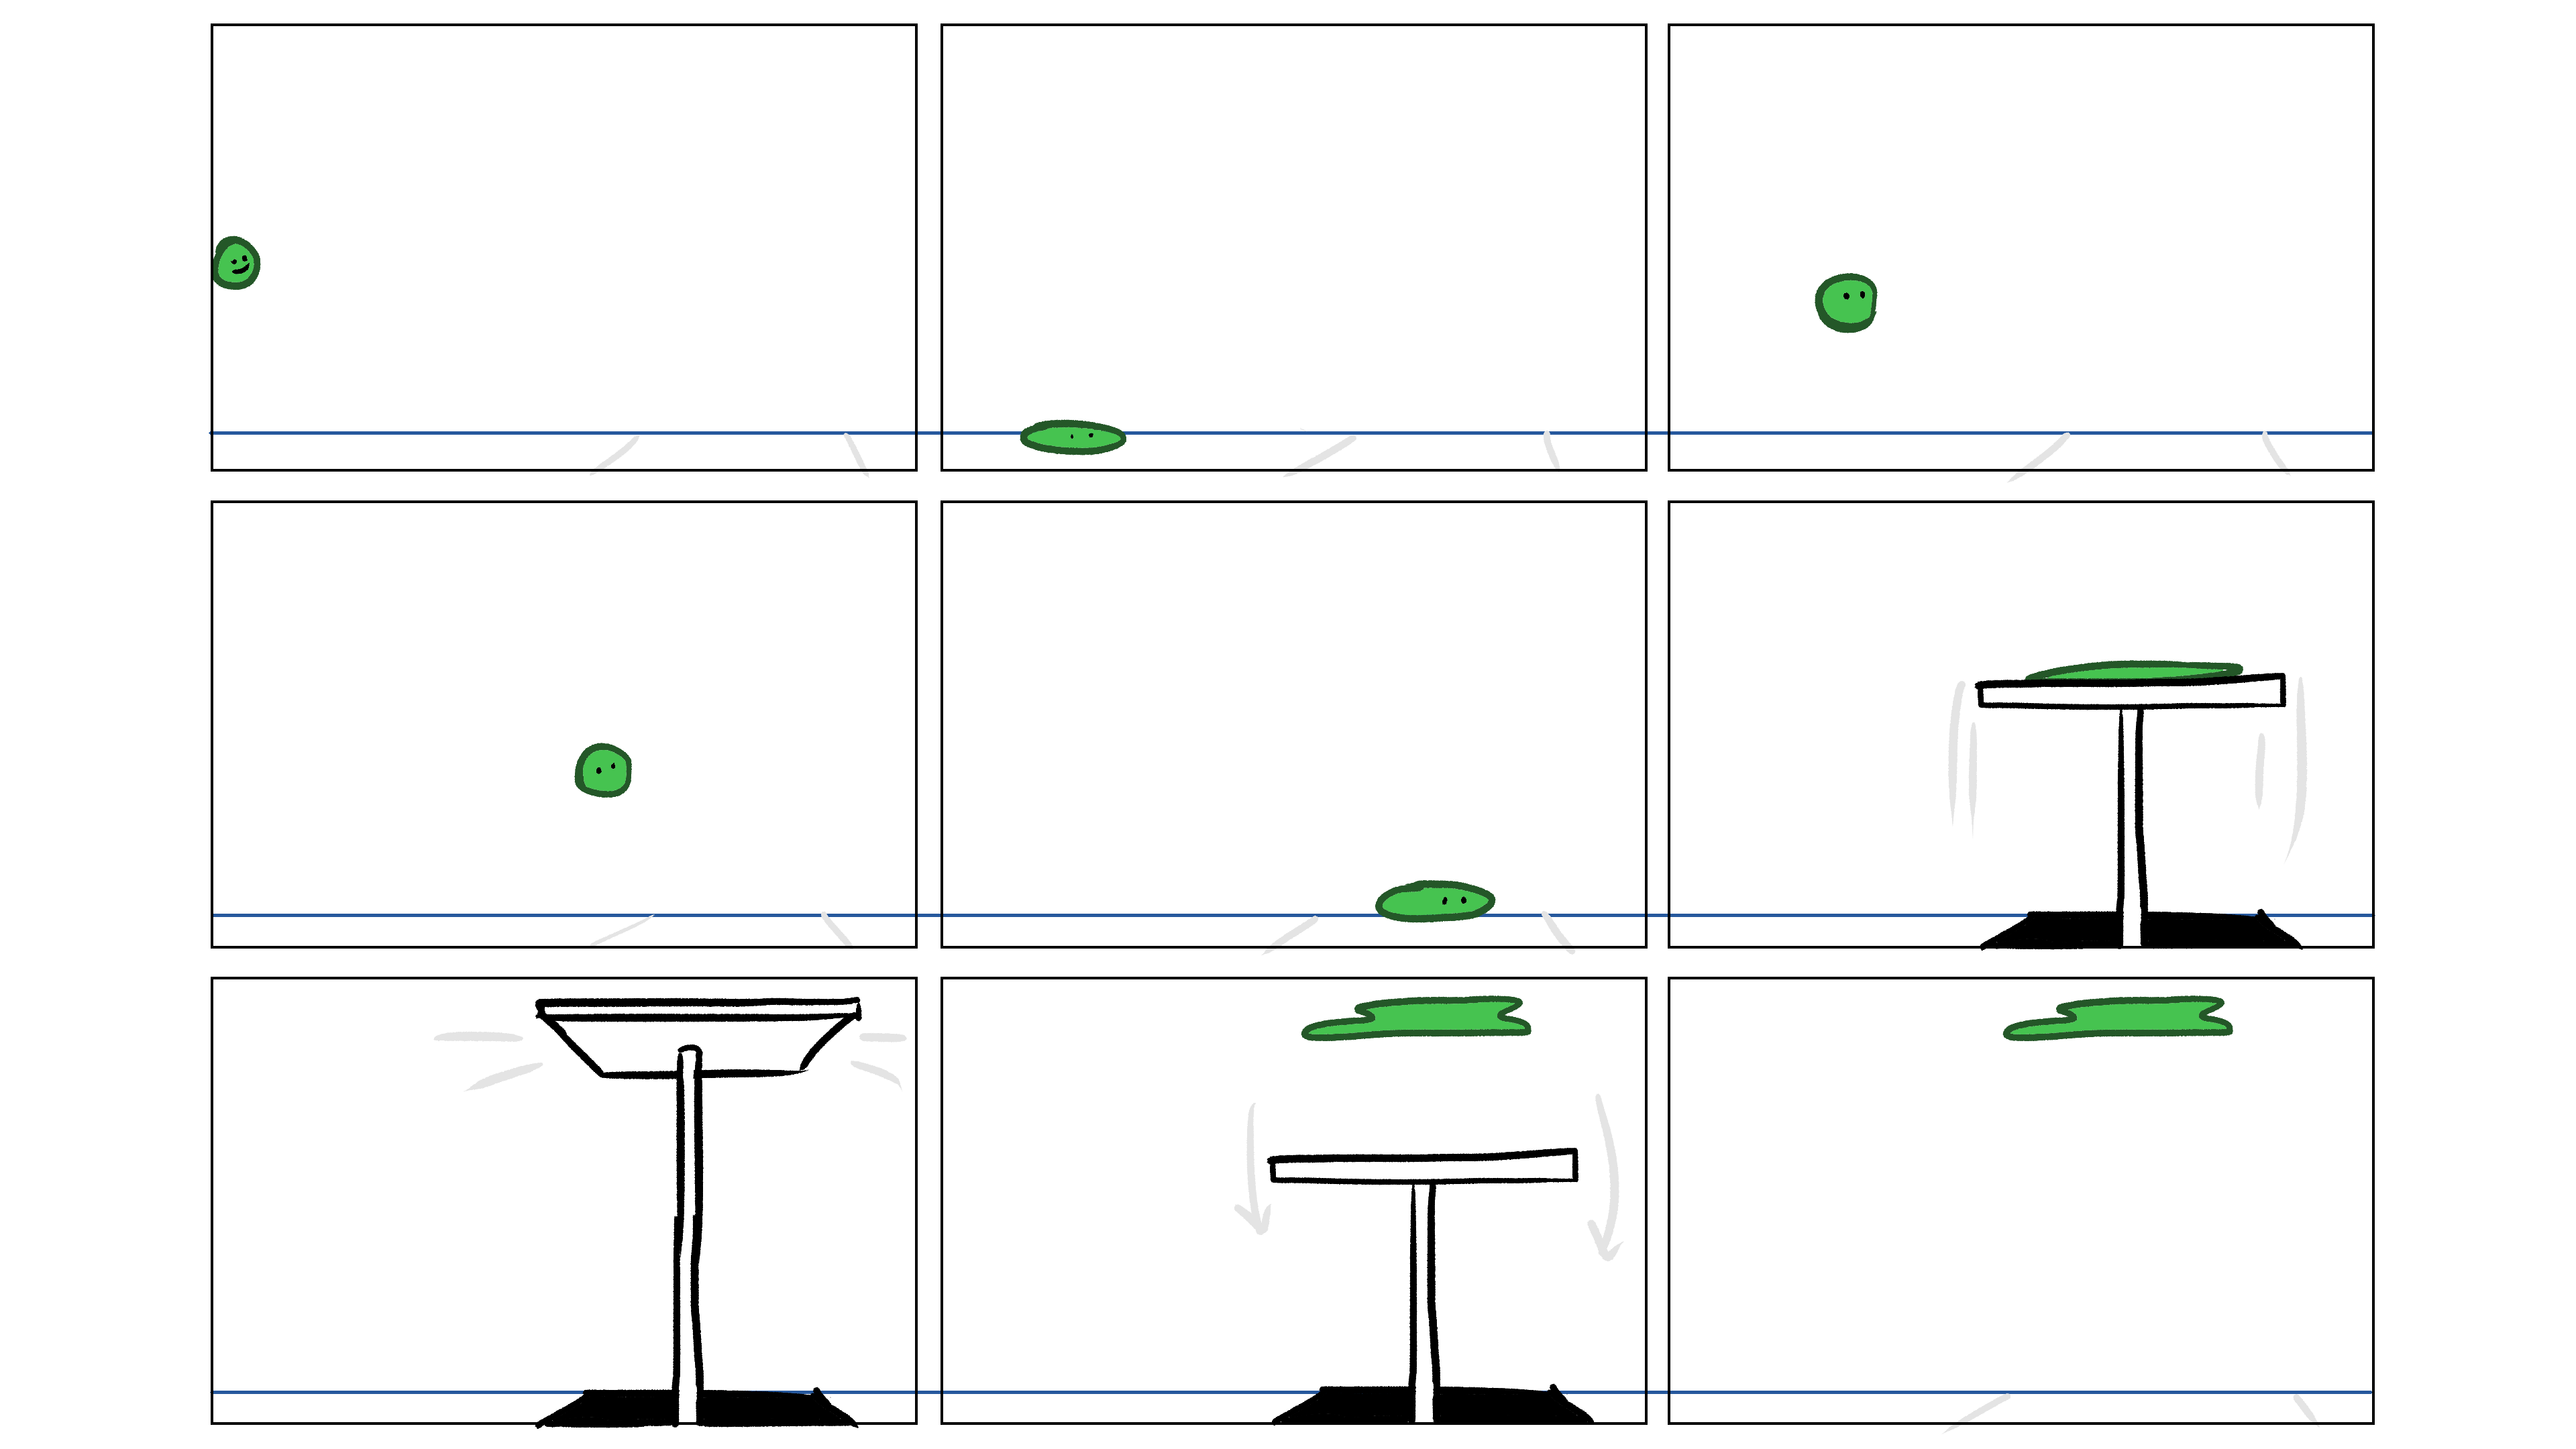 A simple storyboard of the animation.